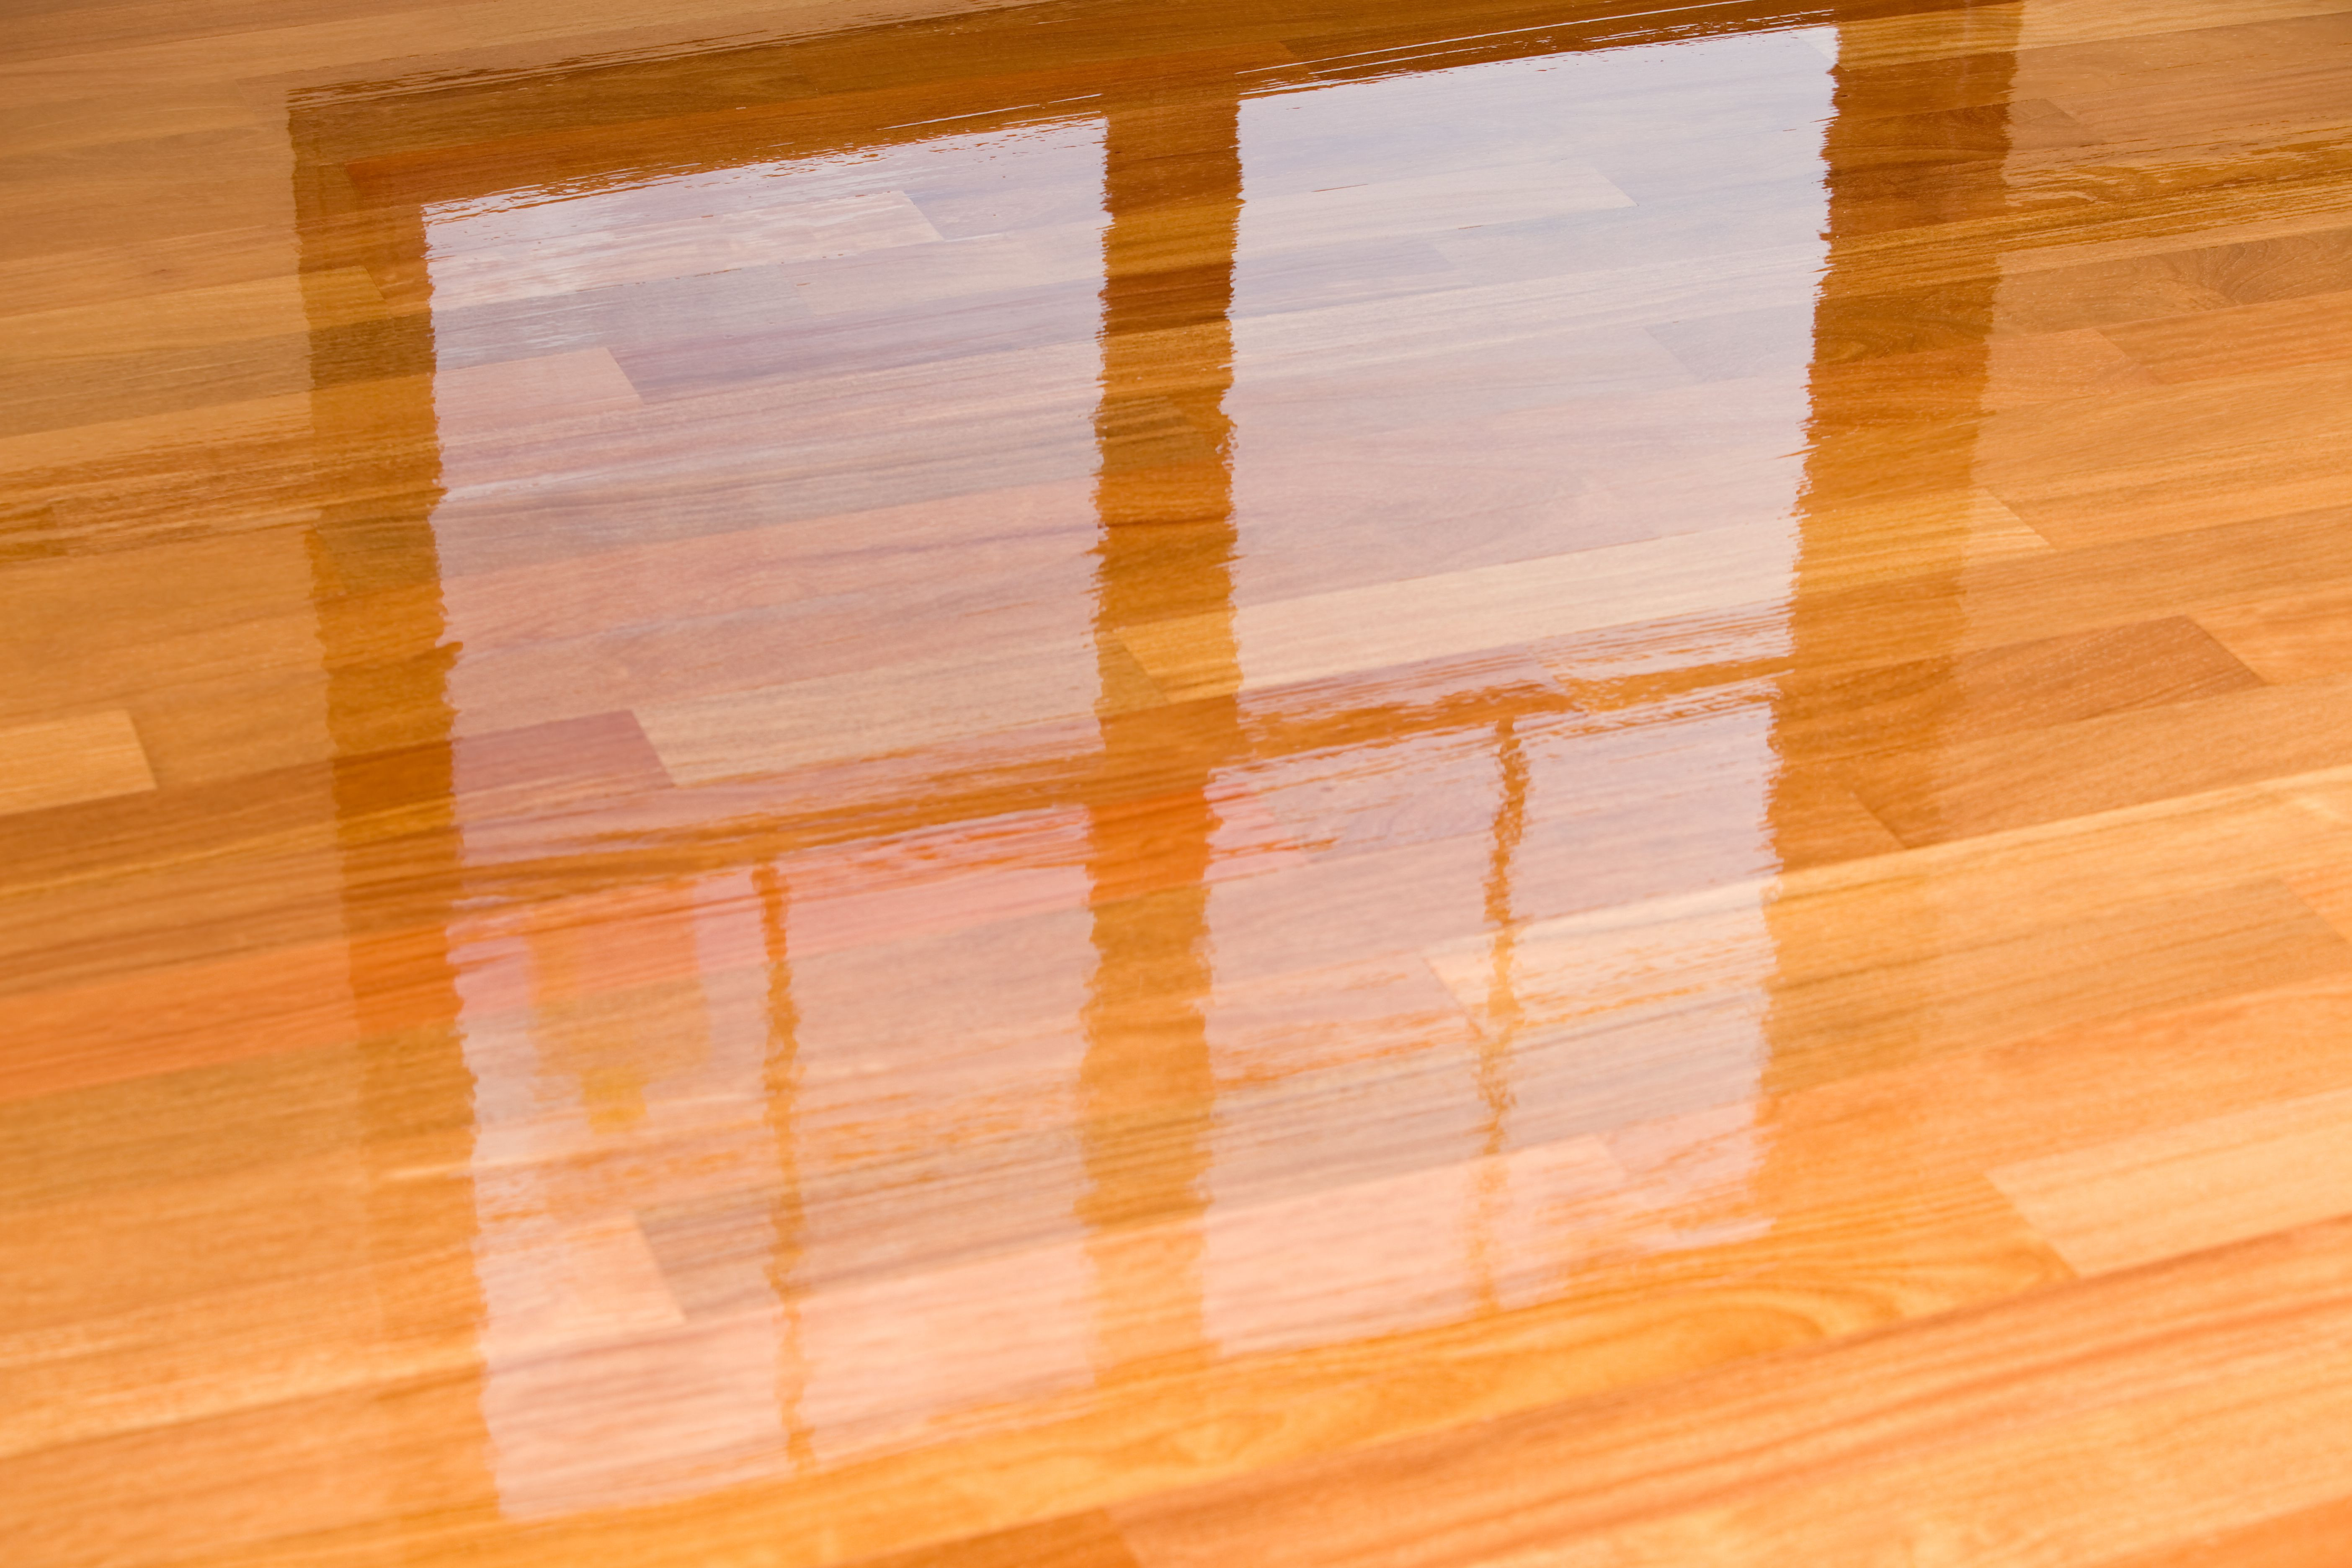 knoxville hardwood floor refinishing of guide to laminate flooring water and damage repair intended for wet polyurethane on new hardwood floor with window reflection 183846705 582e34da3df78c6f6a403968